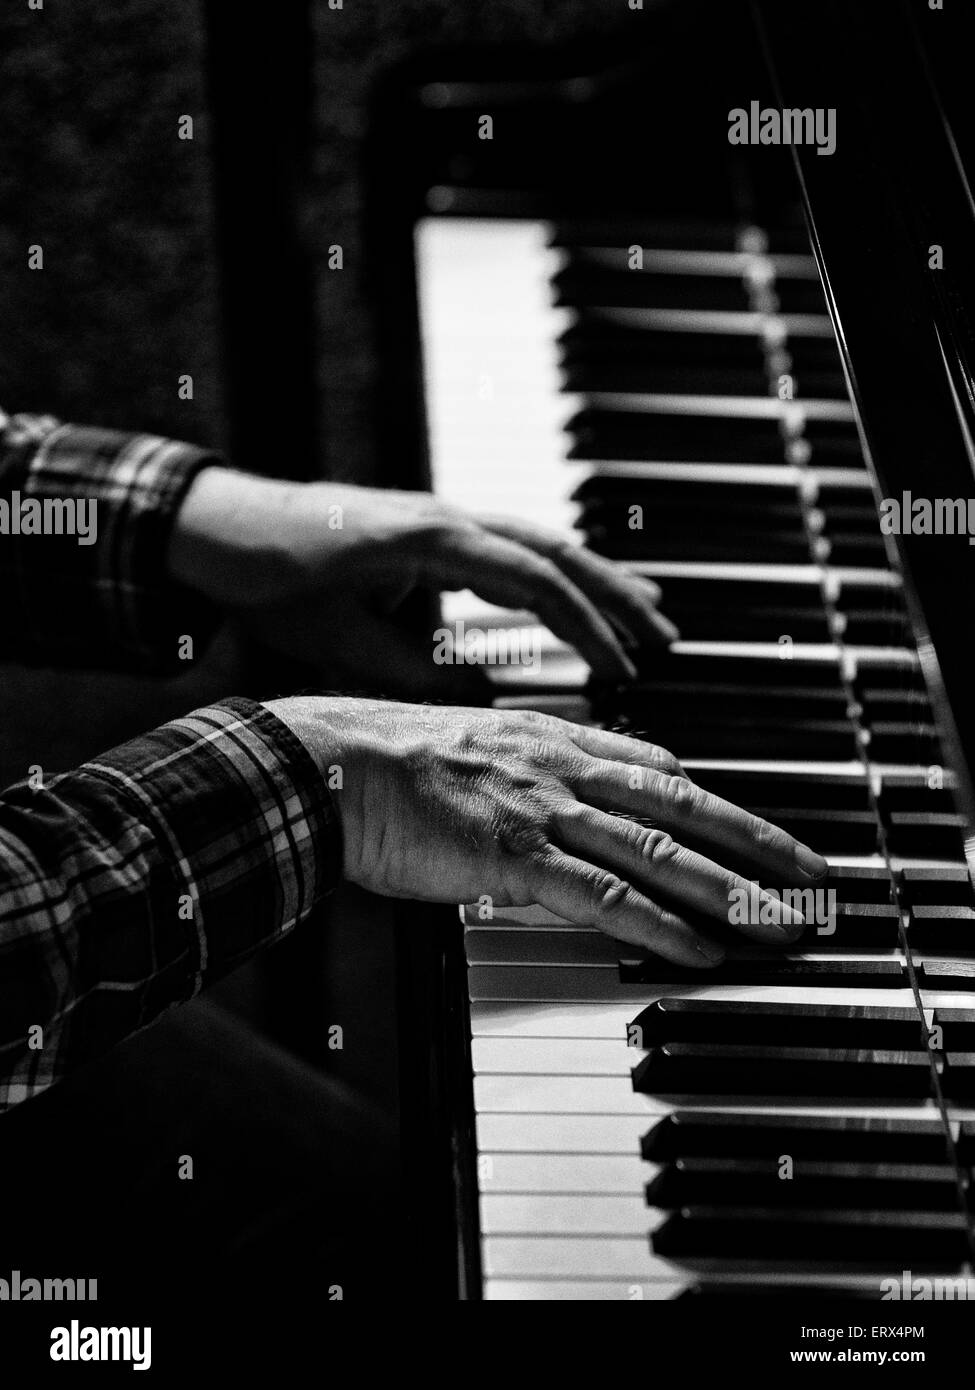 A pianoplayers hands on a piano keyboard Stock Photo